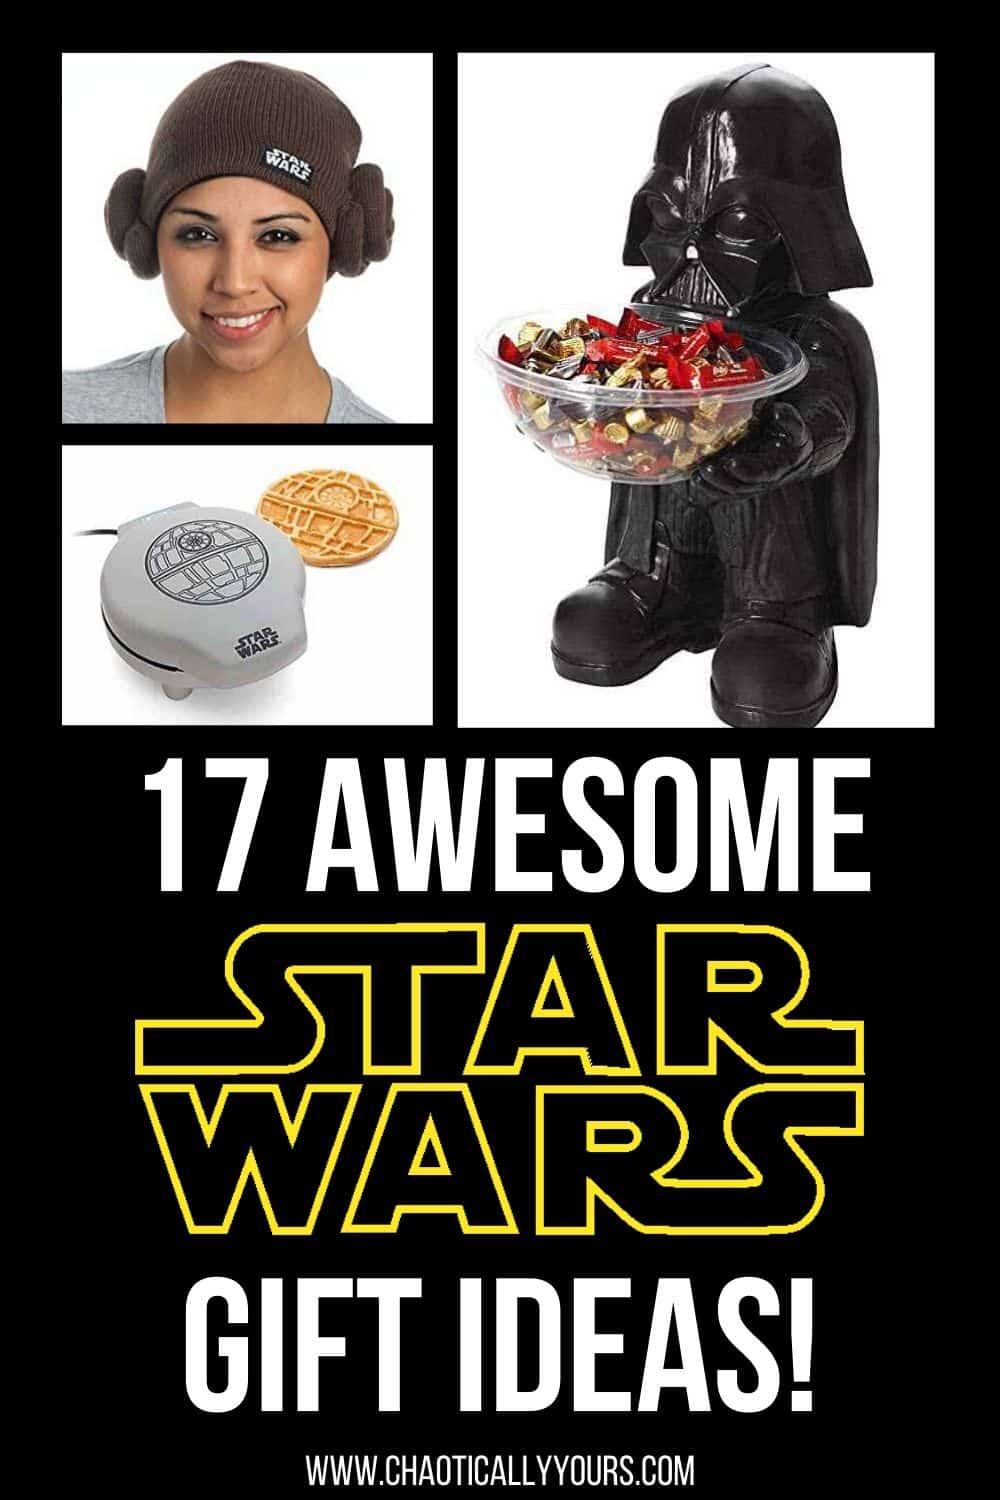 17 Awesome Star Wars Gift Ideas